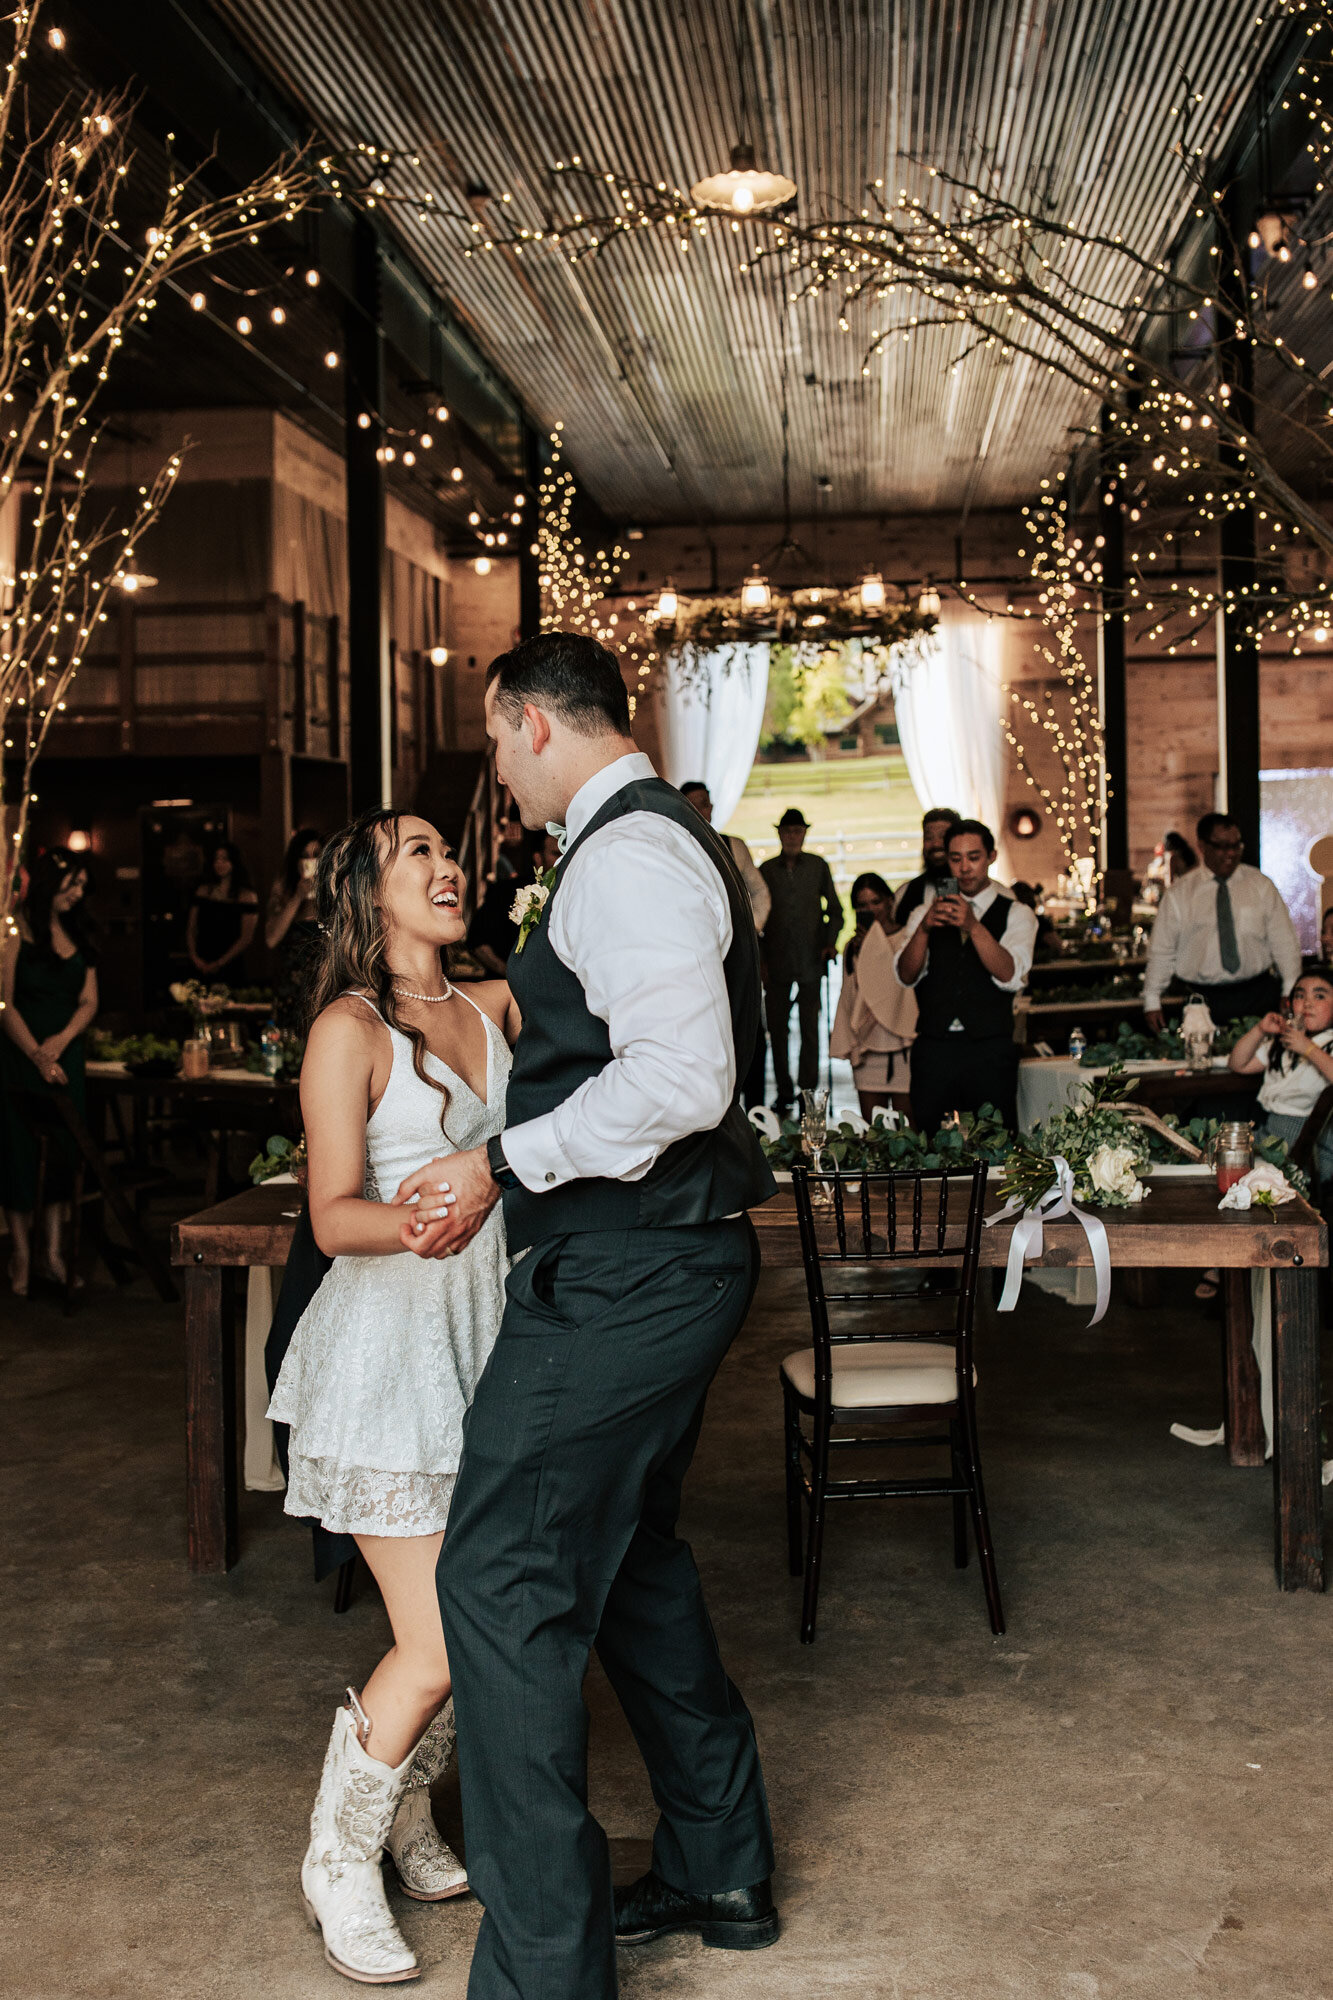  Emily Jenkins Photography captures a couple during their first dance with fairy lights about them and the bride in white cowgirl boots at Quiet Meadow Farms in Utah County. couples first dance short reception dress #emilyjenkinsphotography #emilyjen